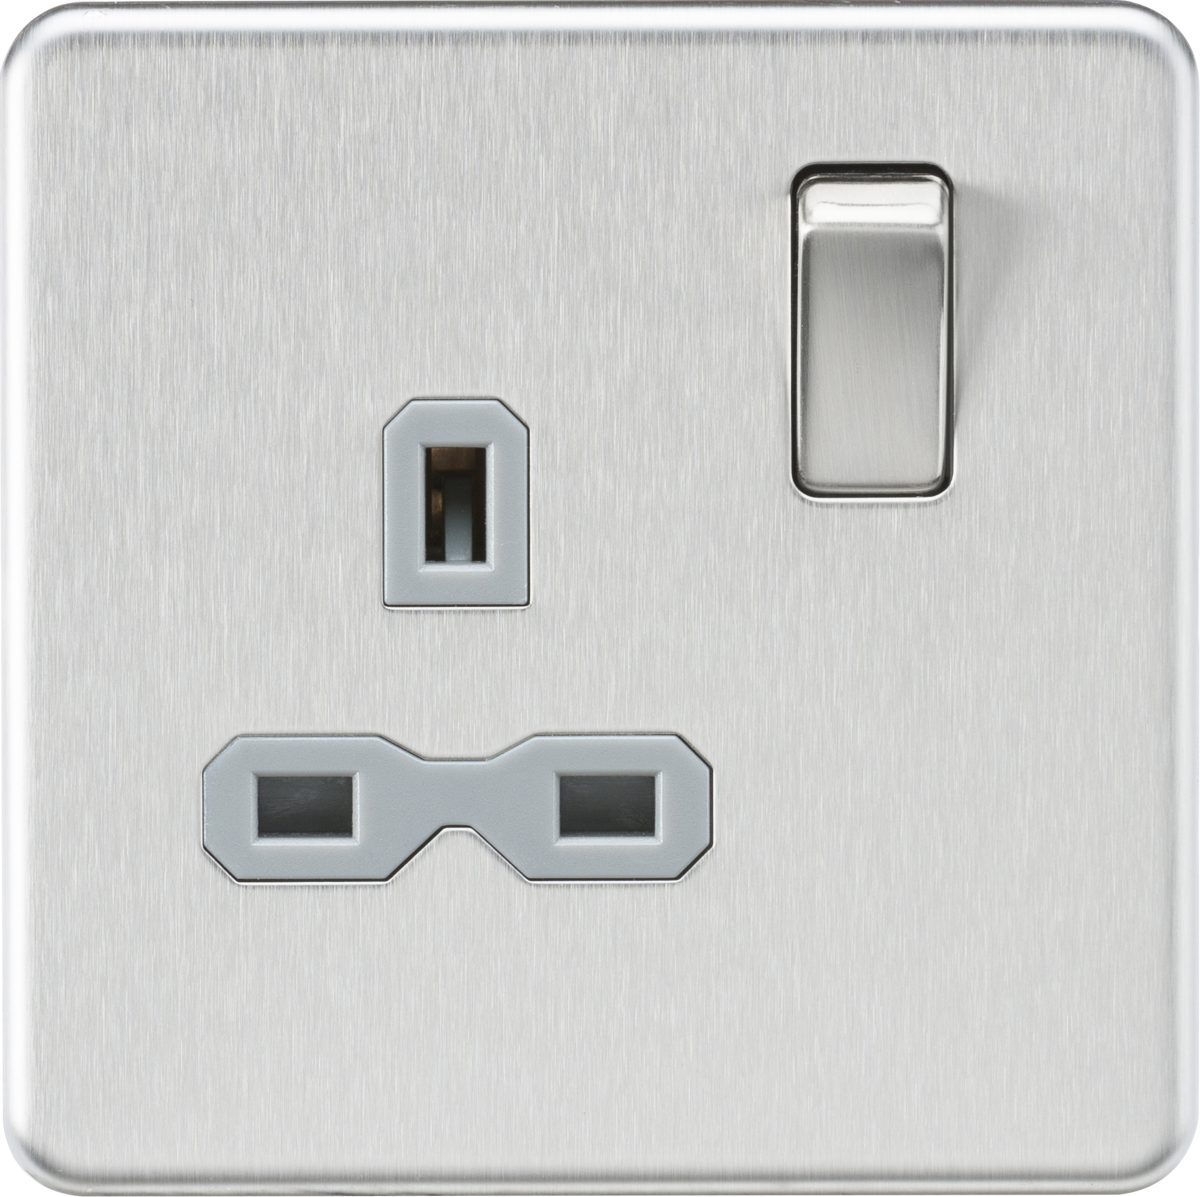 Screwless 13A 1G DP switched Socket - Brushed Chrome with grey Insert